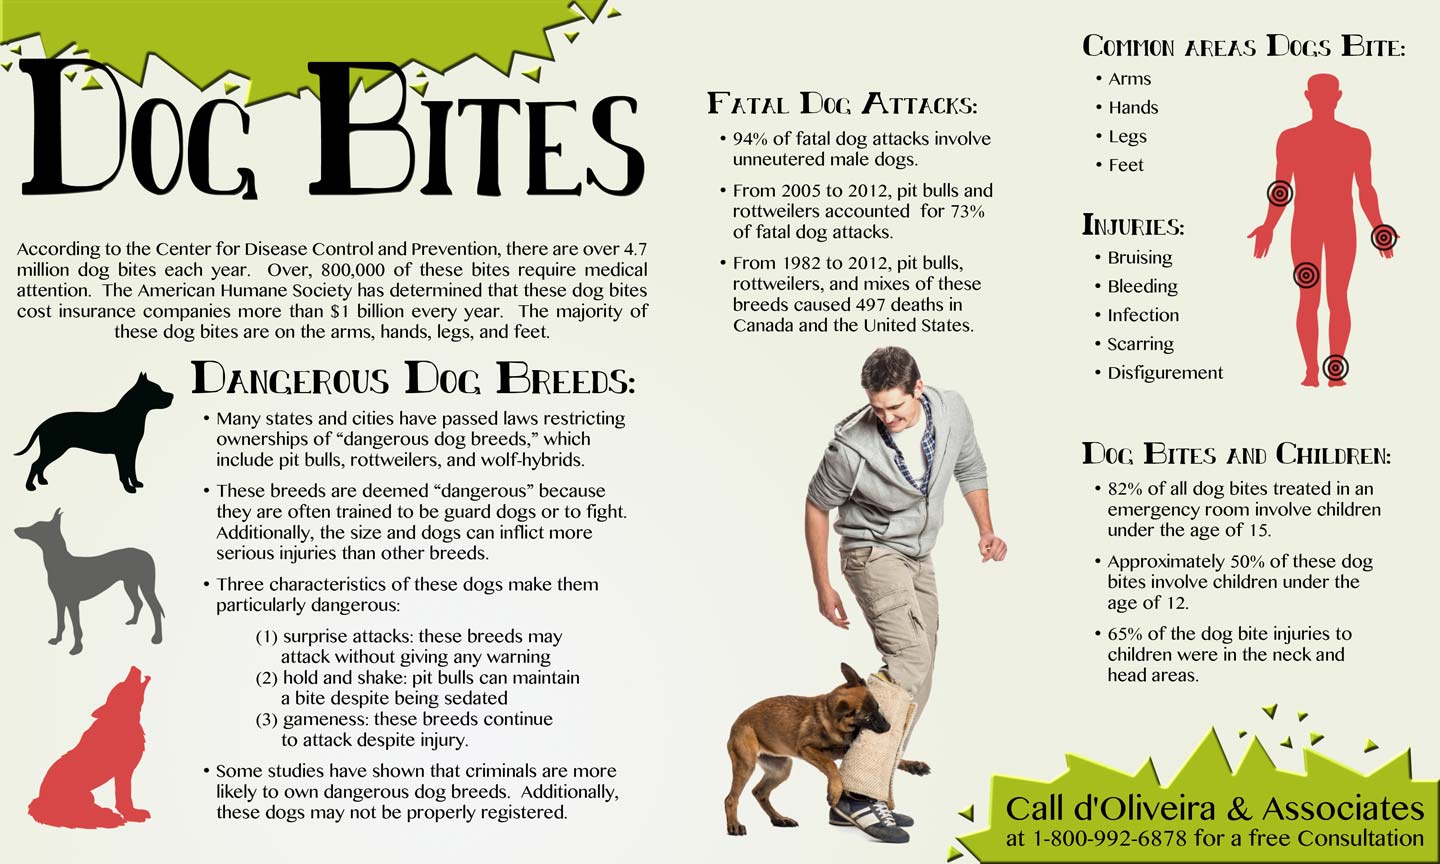 Personal Injury Law Firm Announces New Informational Graphic Regarding Dog  Bite Injuries